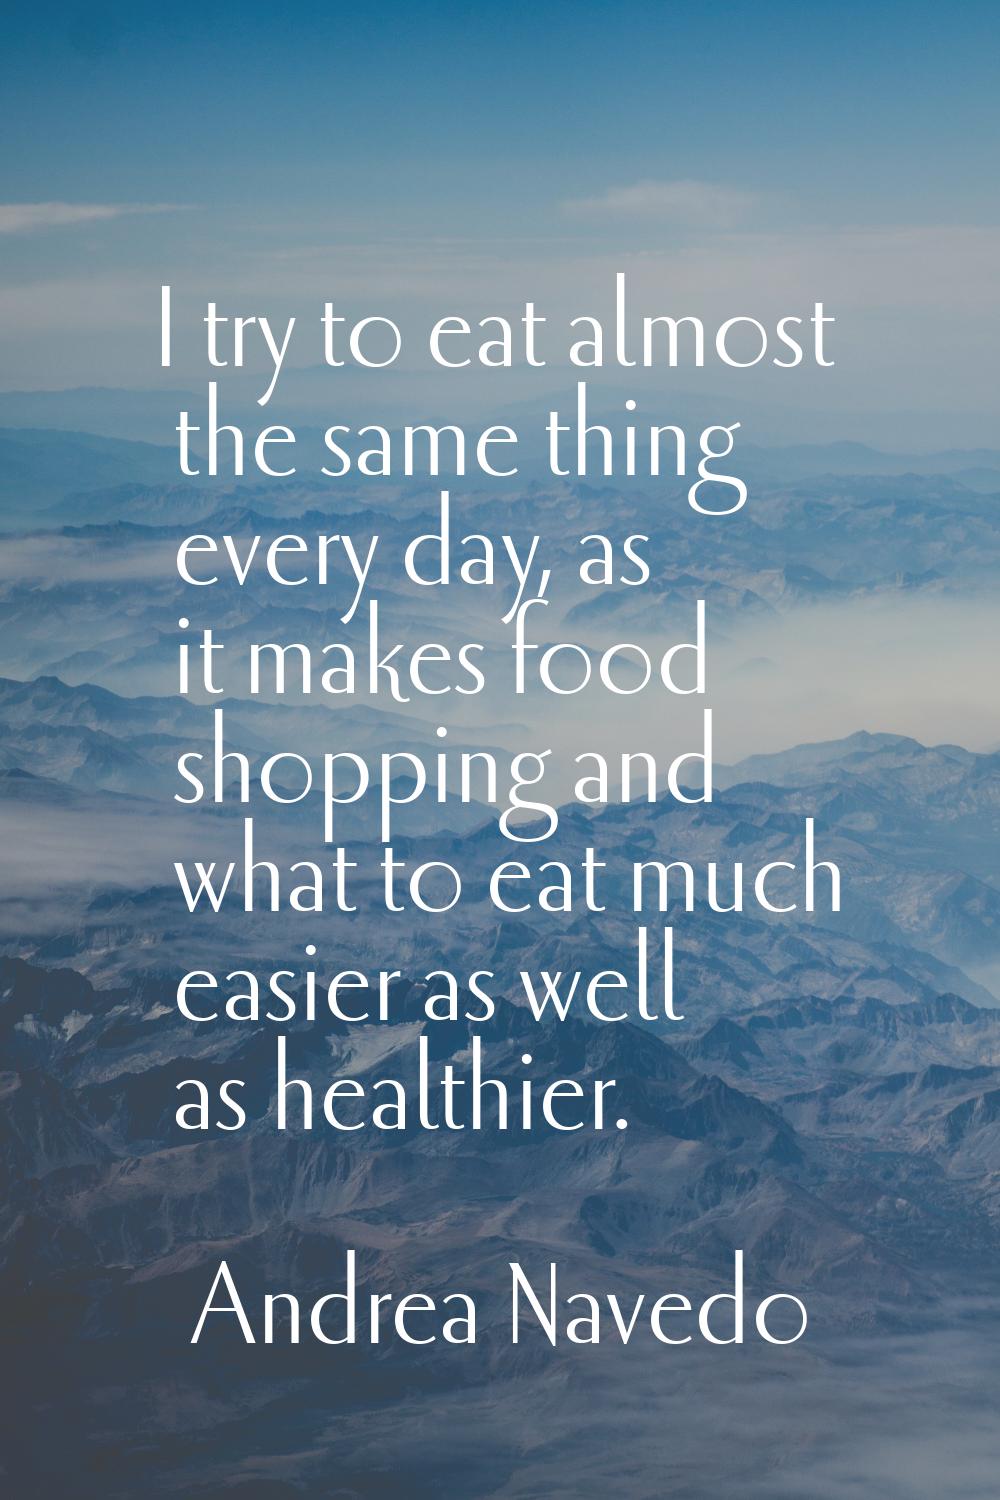 I try to eat almost the same thing every day, as it makes food shopping and what to eat much easier